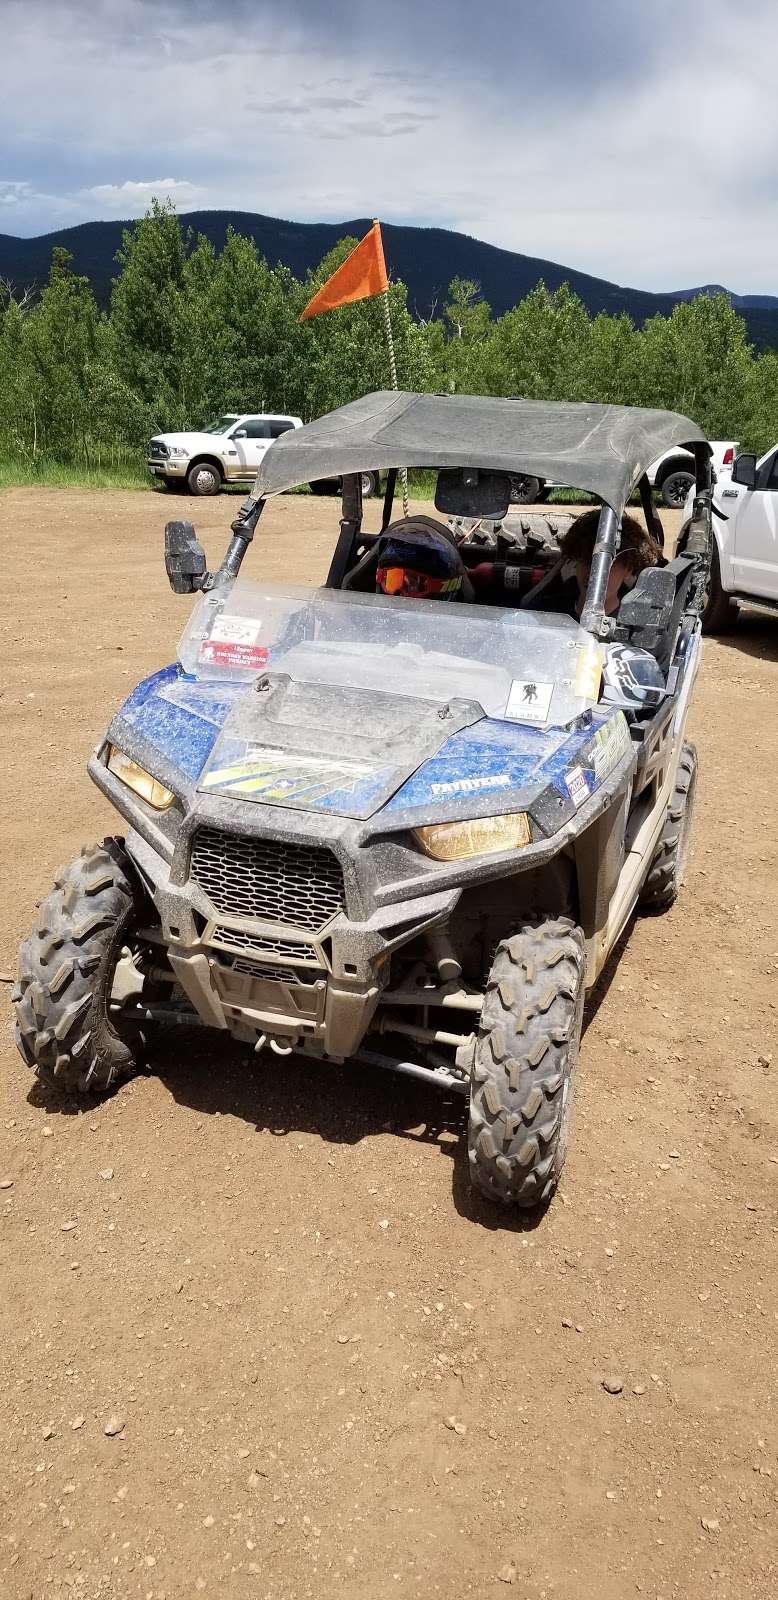 Staging Area to unload RZR | Black Hawk, CO 80422, USA